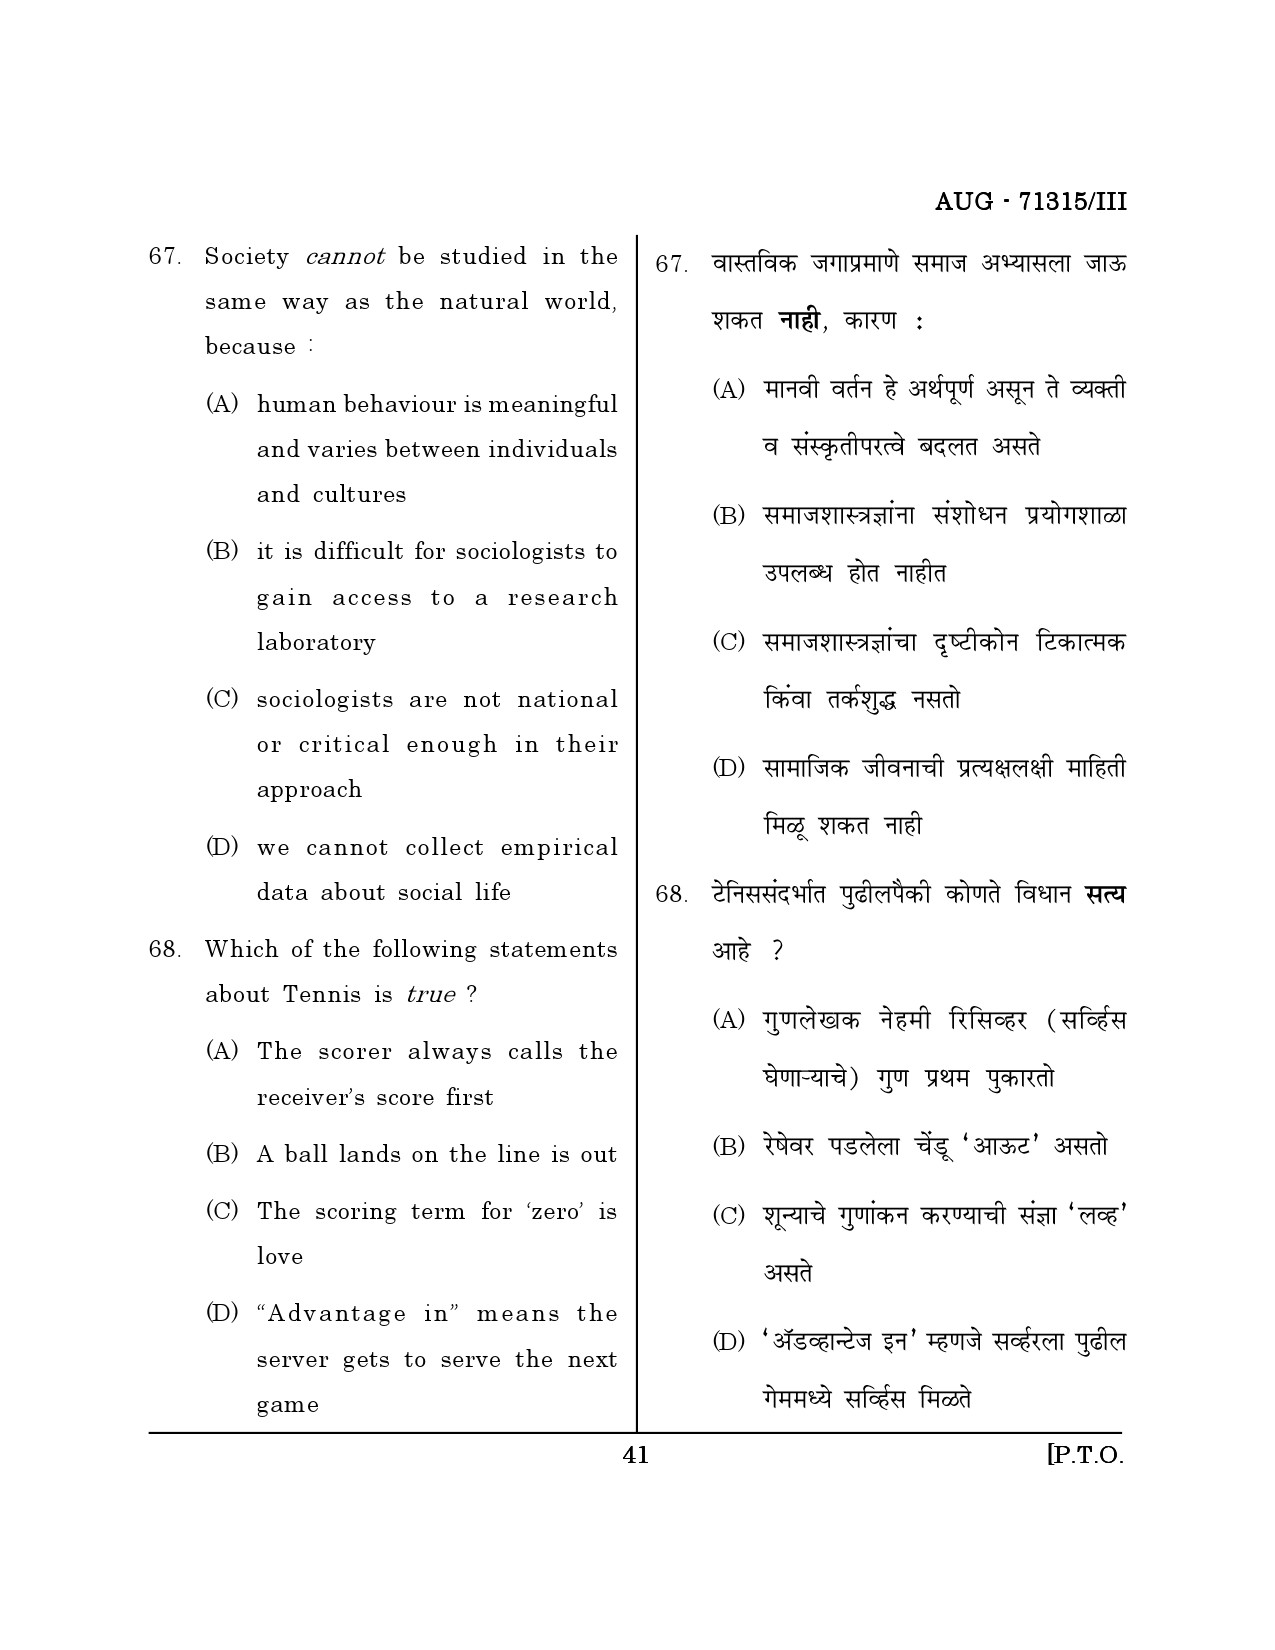 Maharashtra SET Physical Education Question Paper III August 2015 40